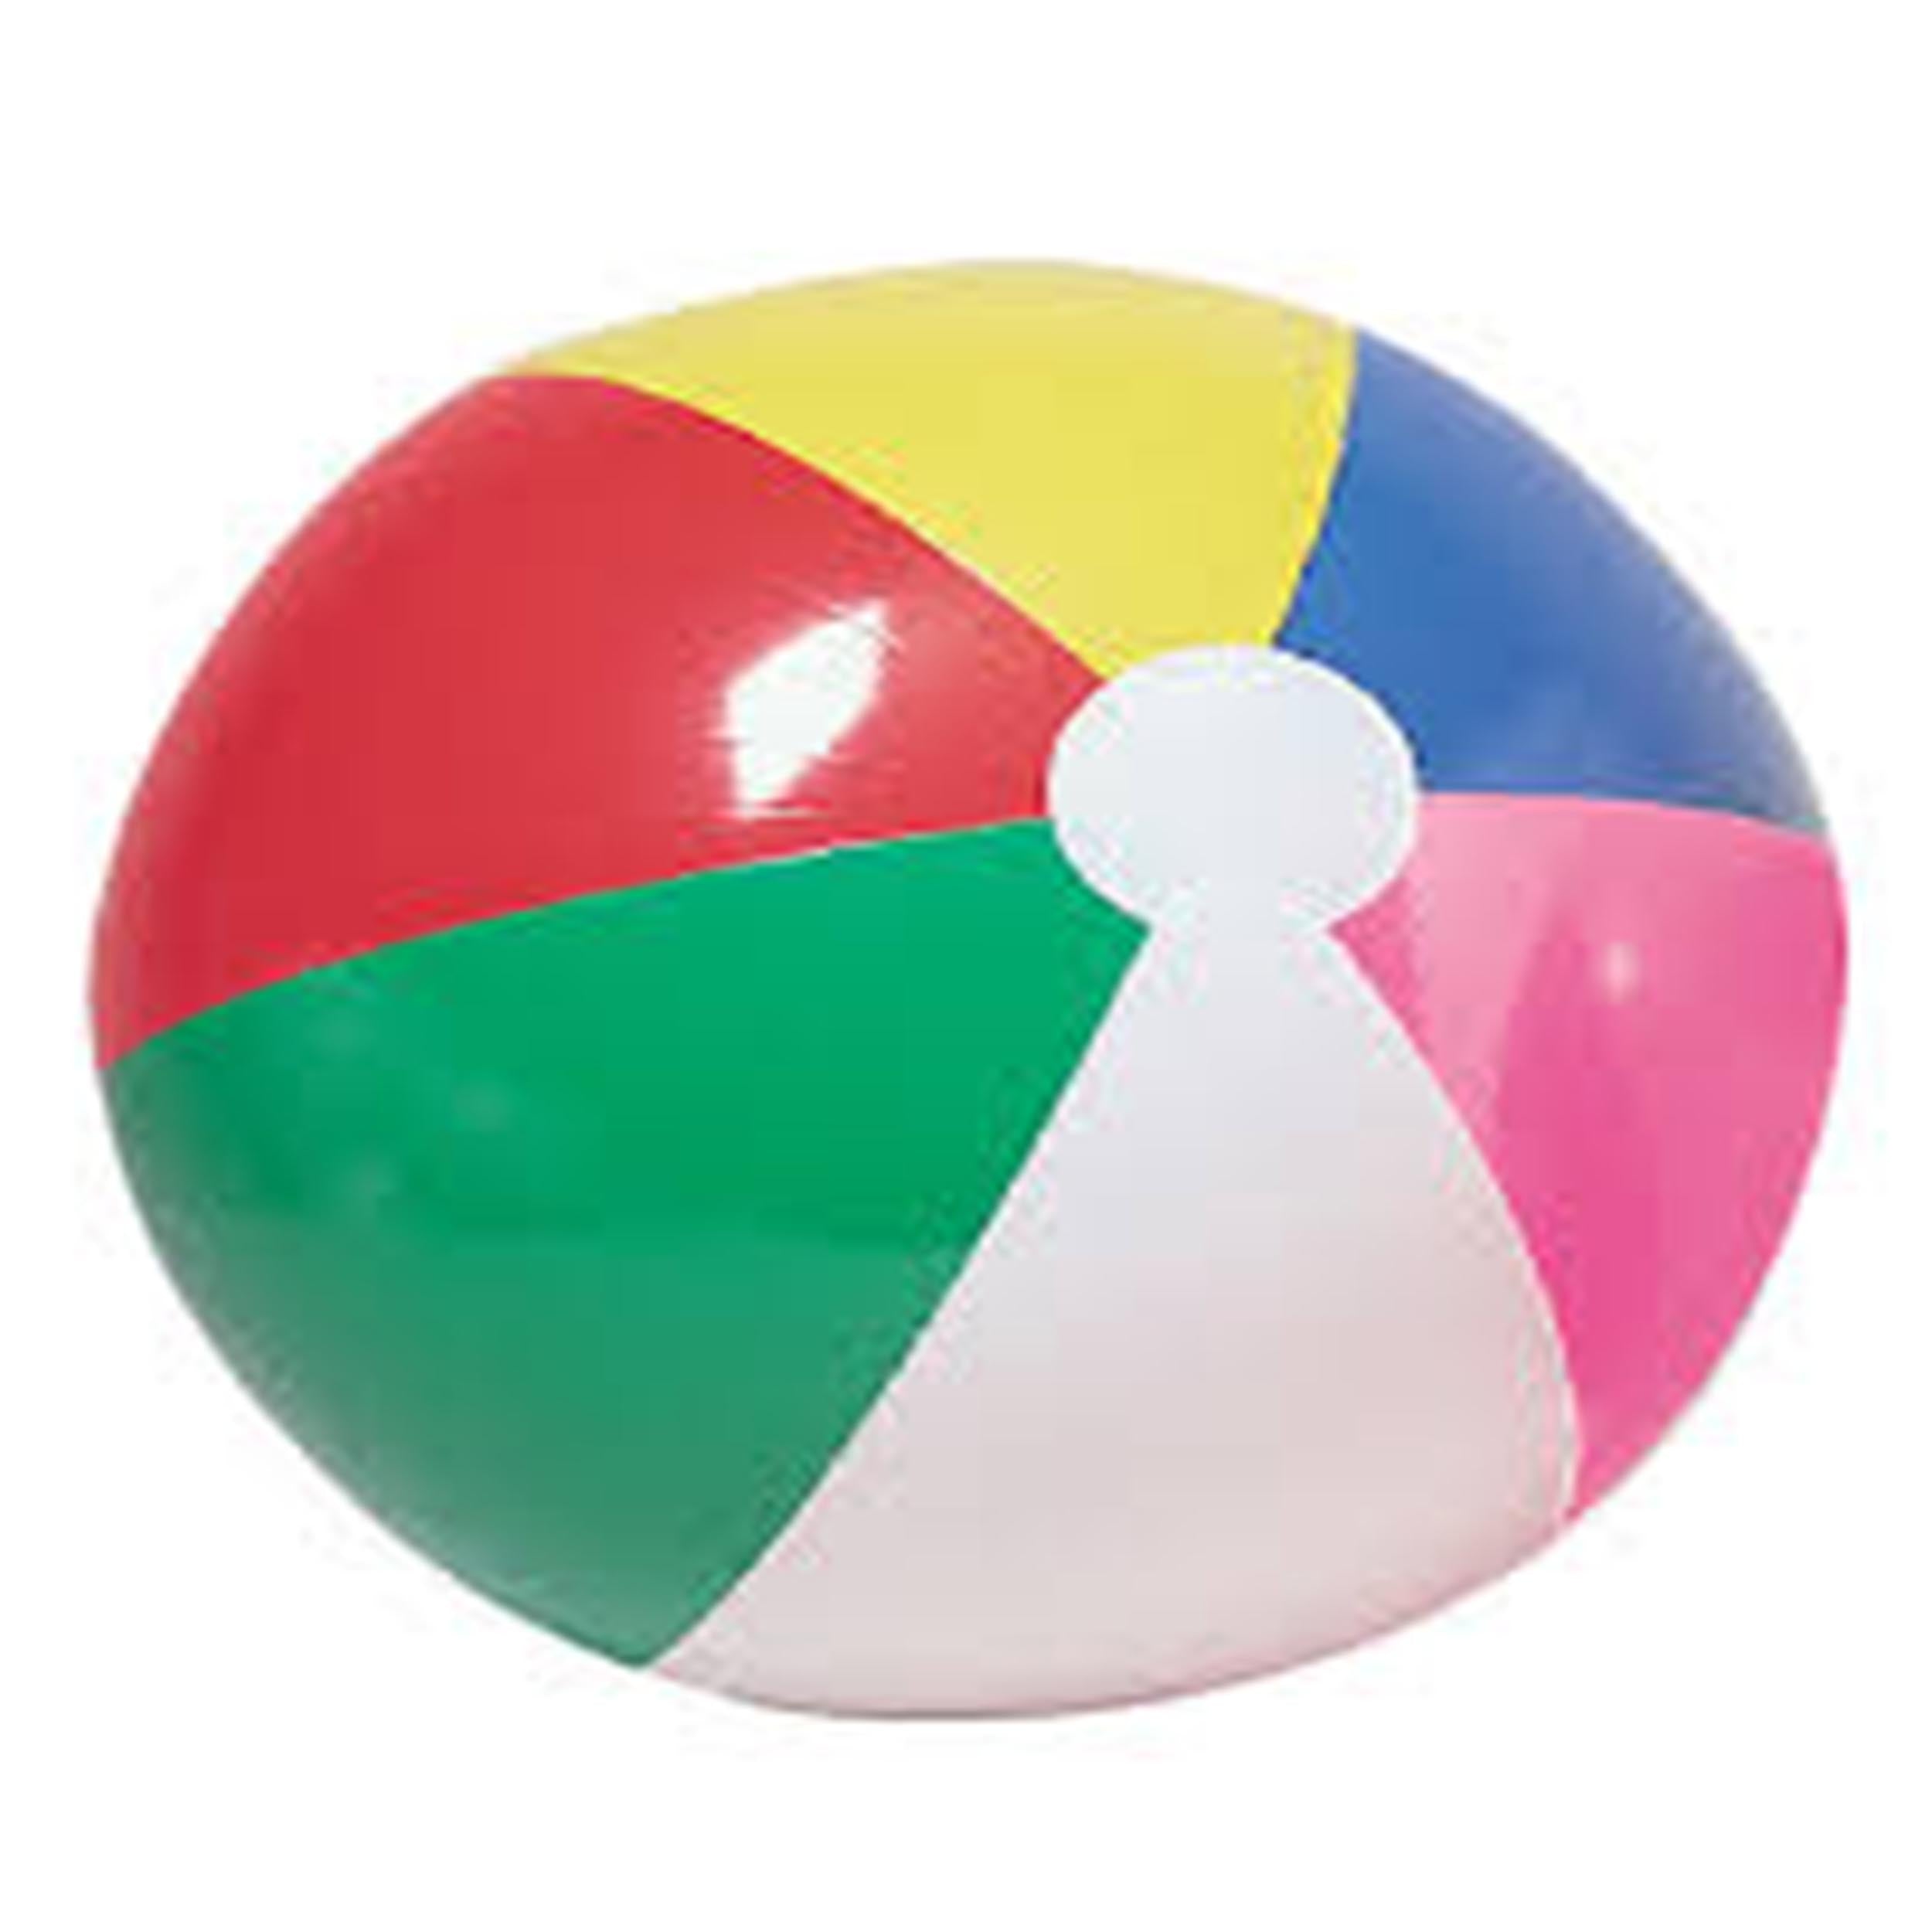 6" Multi-color Beach Ball Inflate - Pack of 12 - Fun Outdoor Toy for Summer Assorted Colors (MOQ-12)